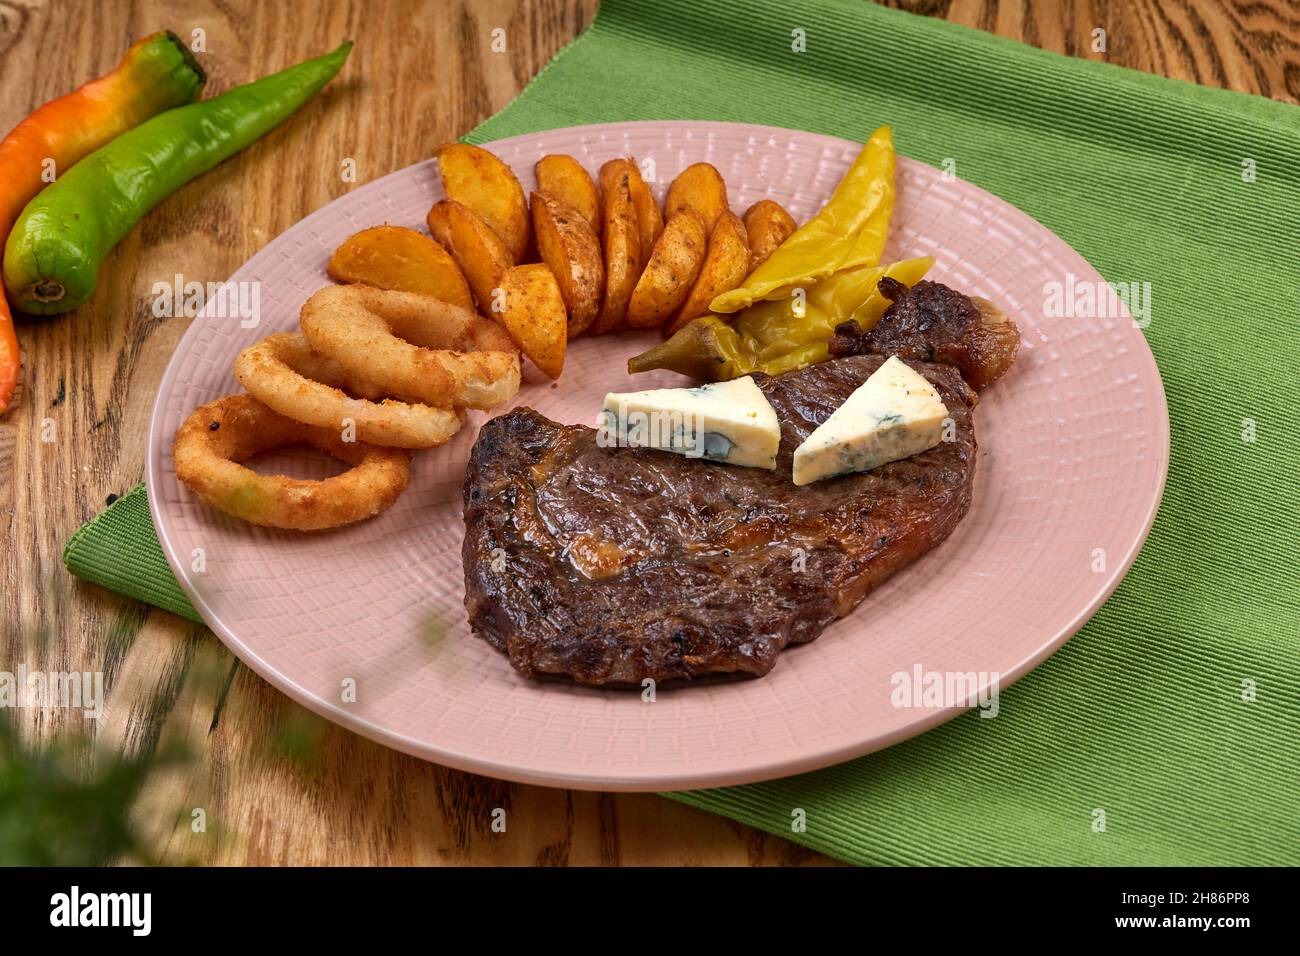 Grilled steak with baked vegetables Stock Photo